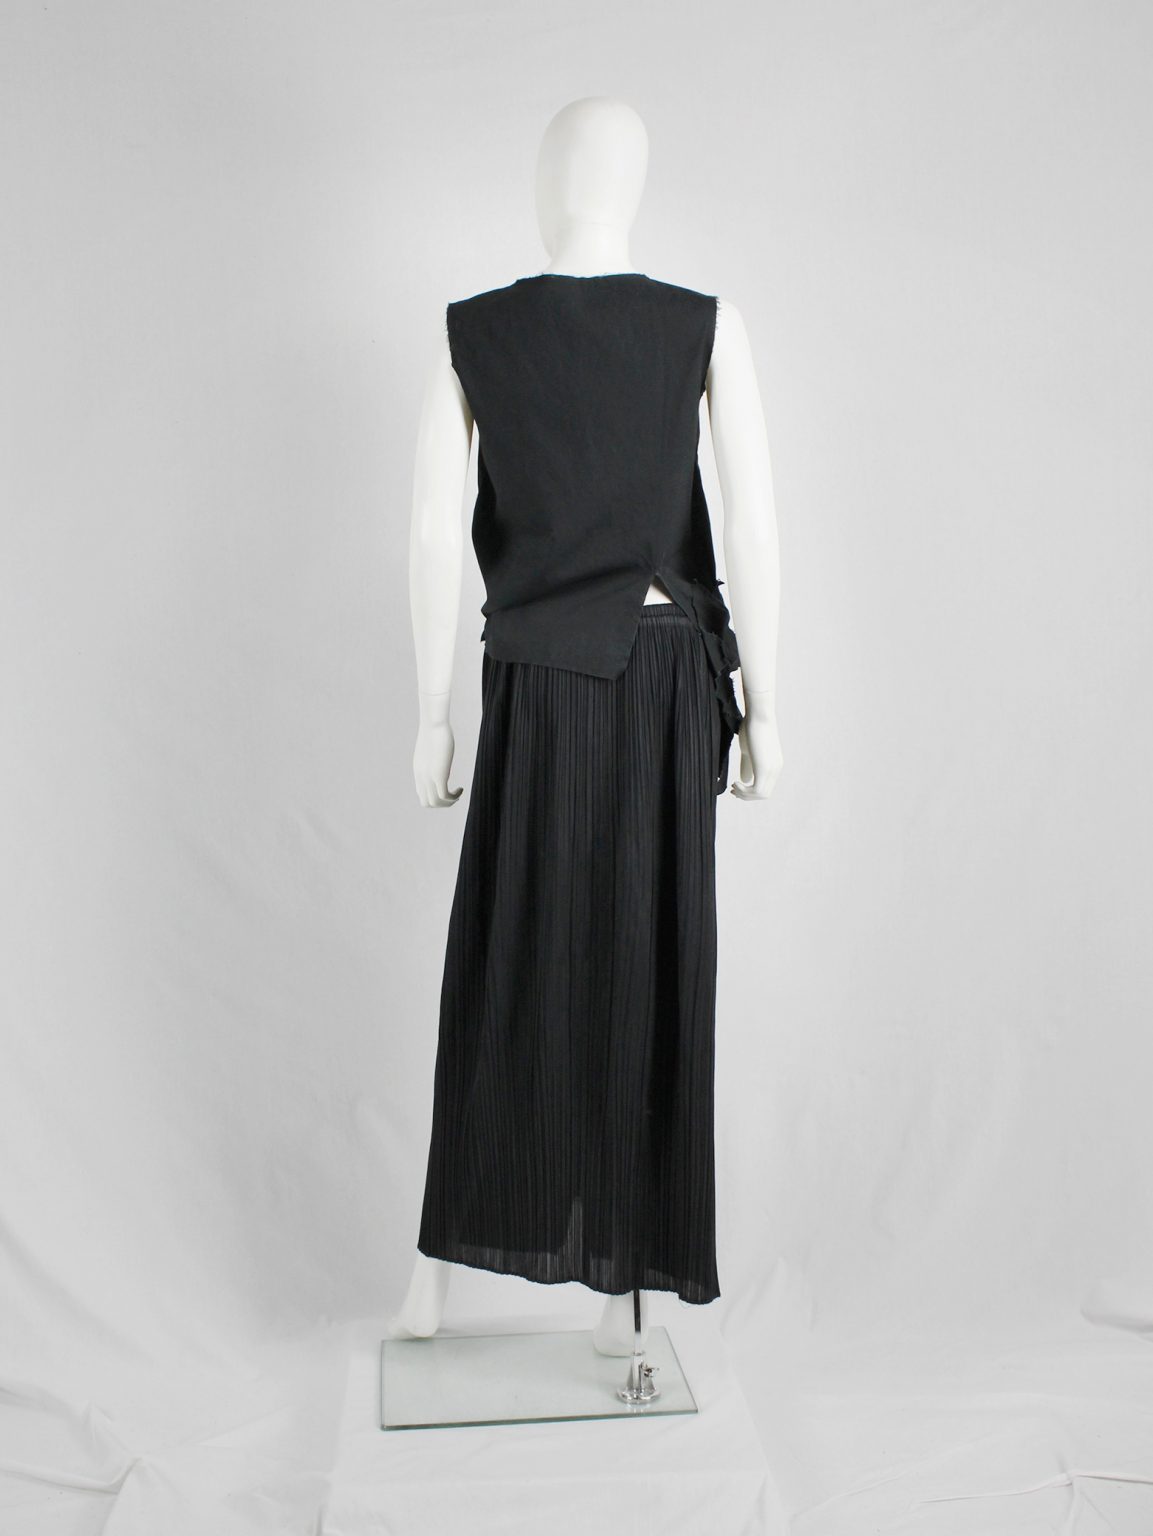 Issey Miyake Pleats Please black pleated maxi skirt with front zipper